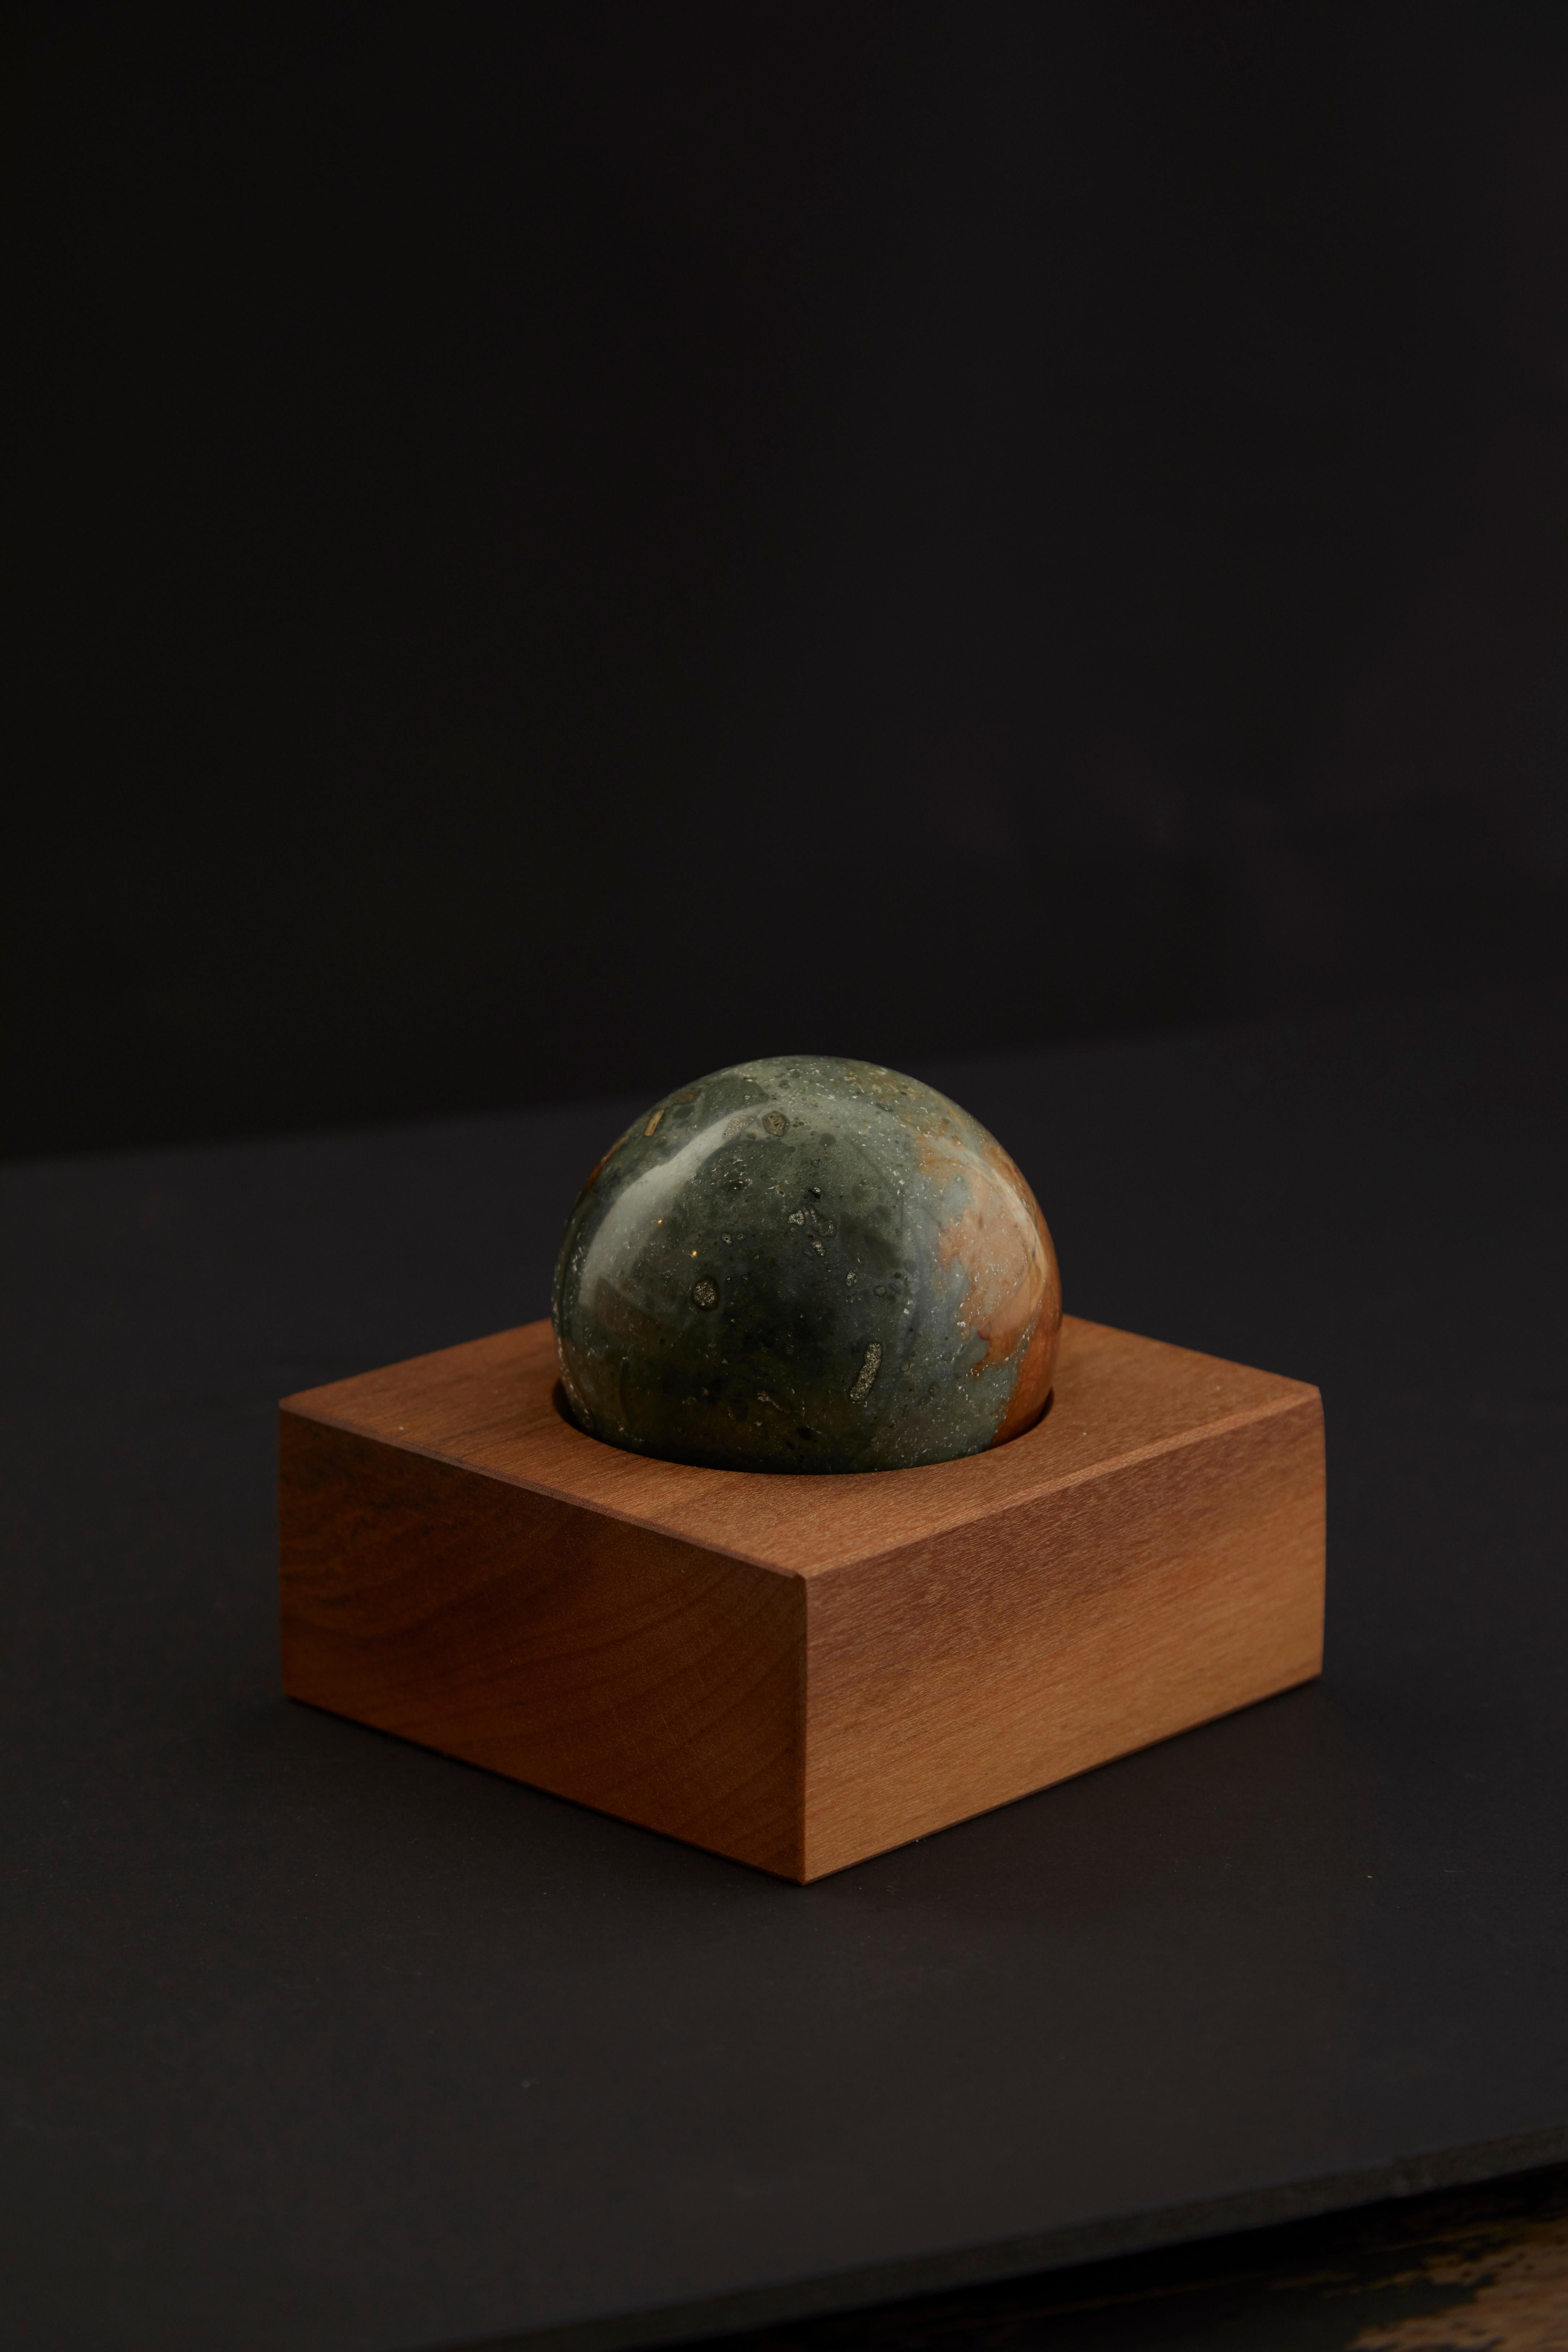 Let herbs and spices show off their true flavors with this beautiful gemstone and wood piece. This mortar will not only bring out the true essence and aroma of your traditional spices, it will also look great on your kitchen counter.
The mortar is